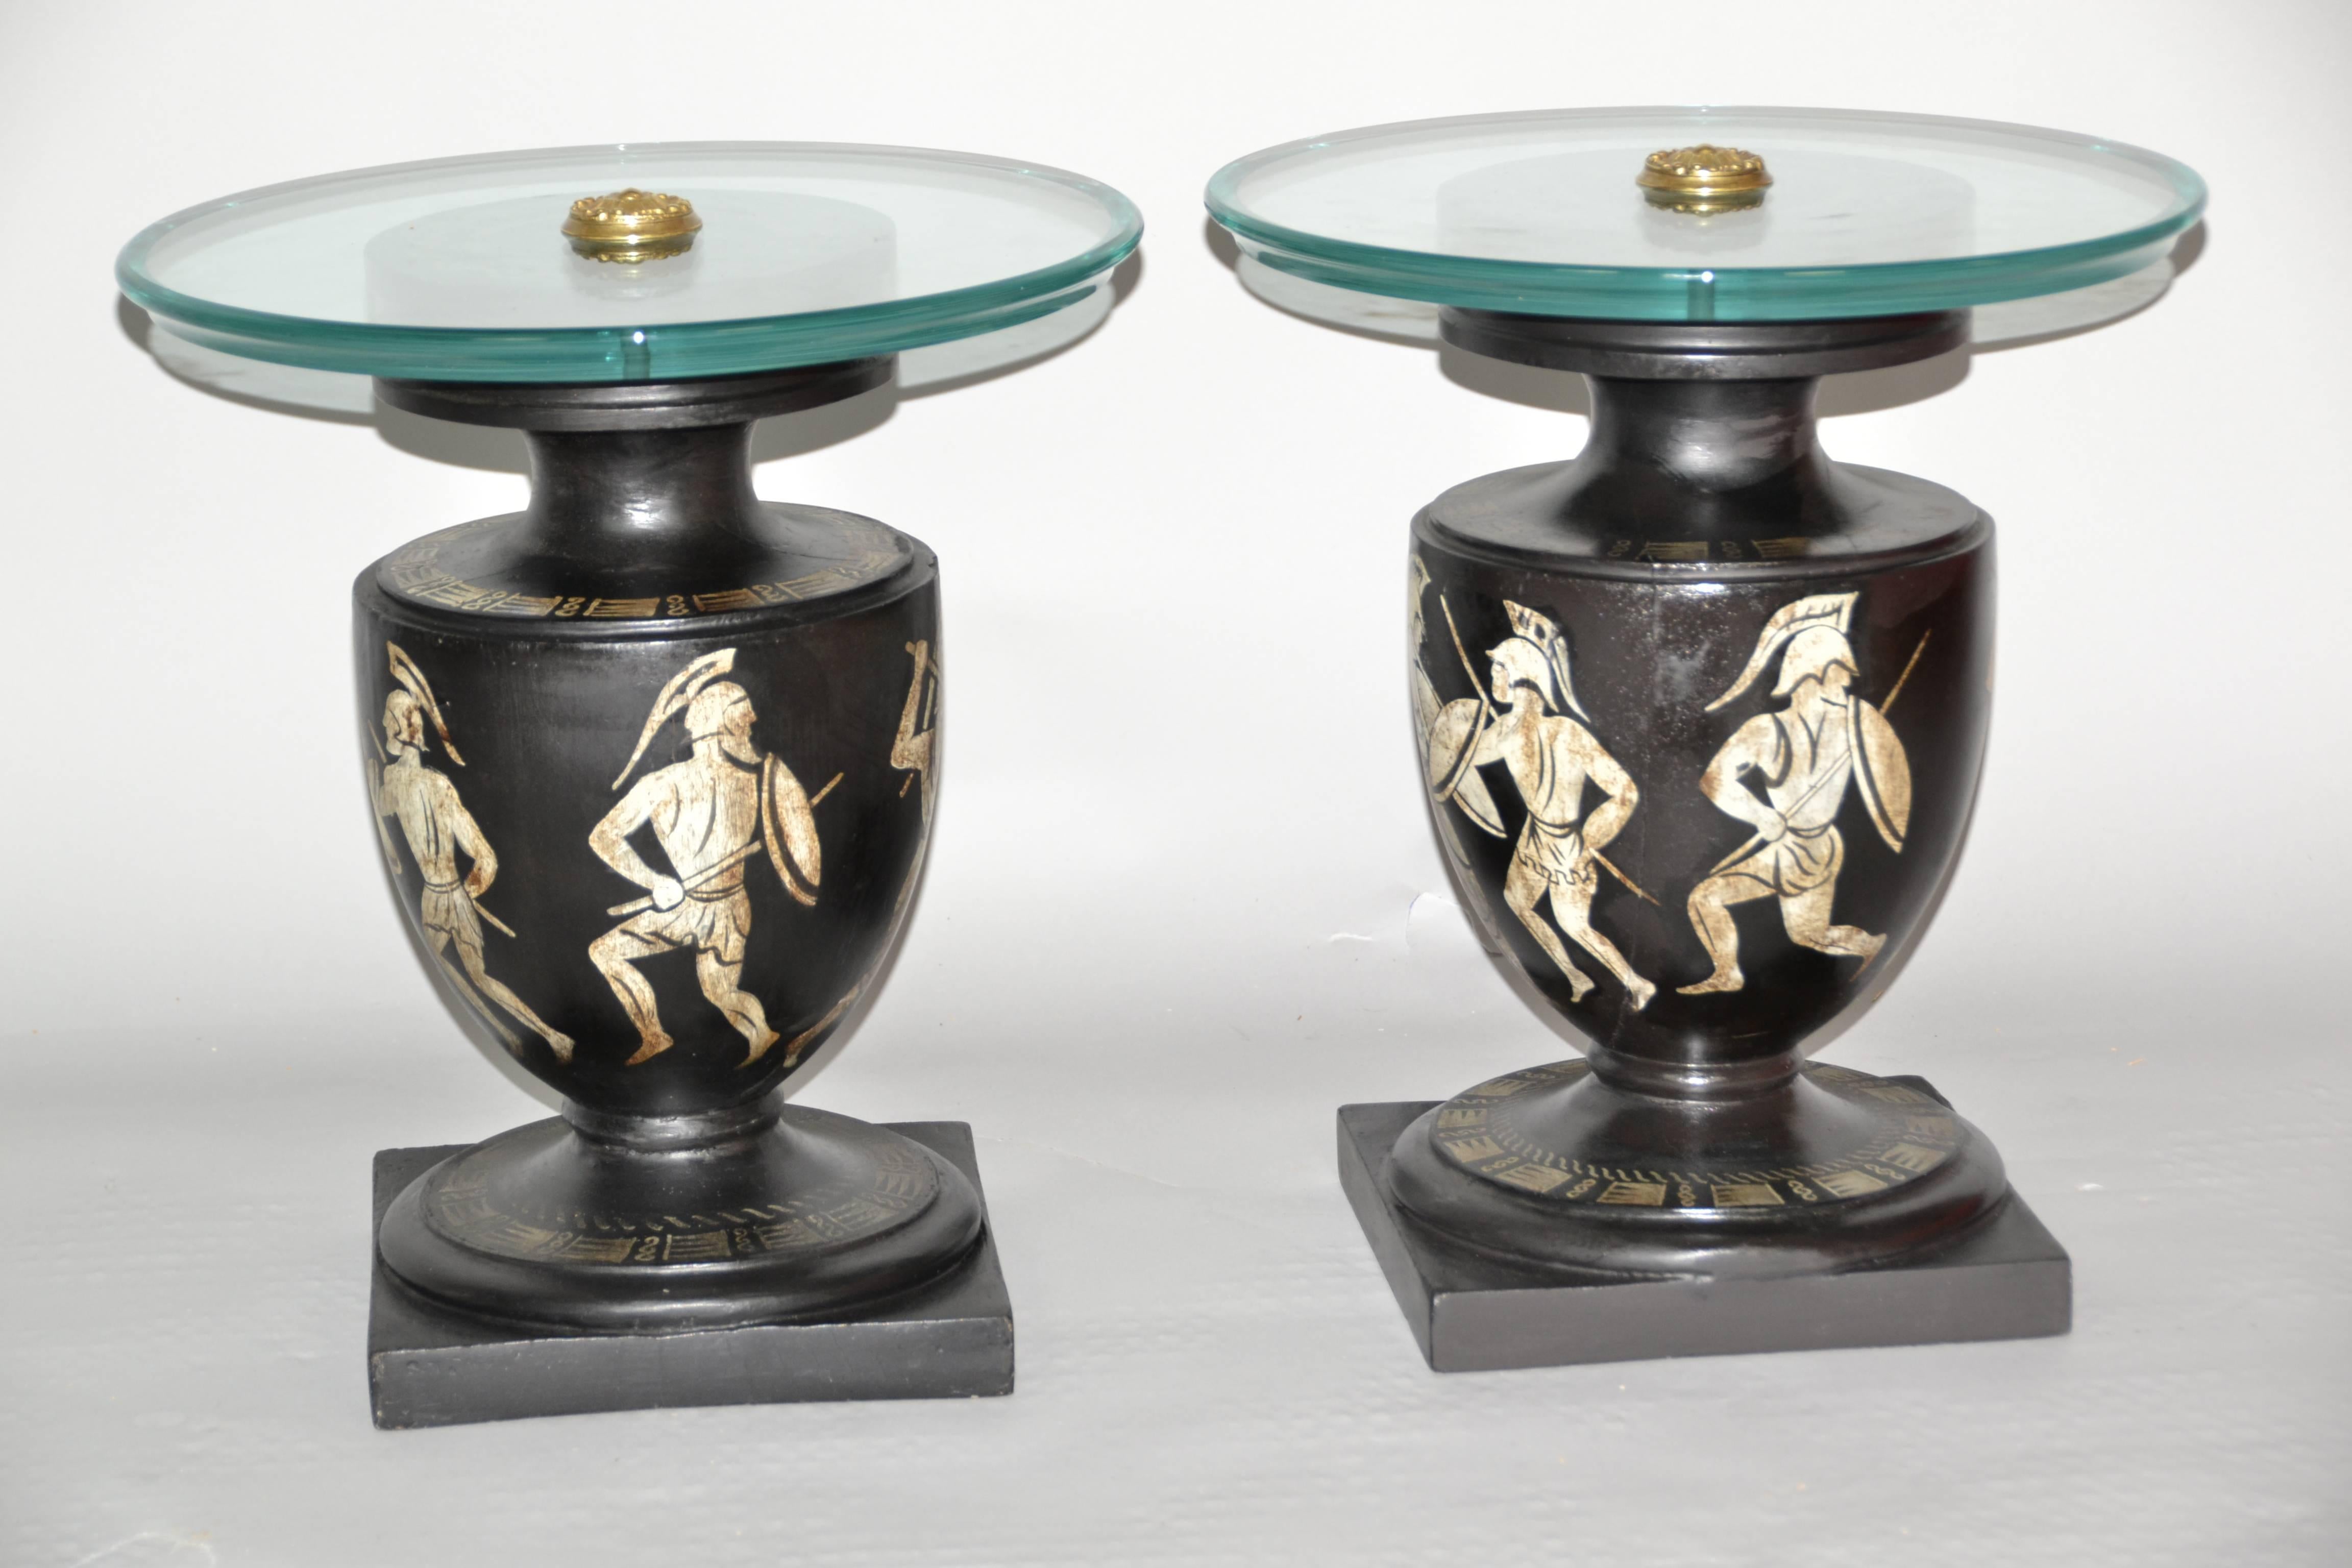 A Neoclassical pair of mid century Italian black and white painted wooden urn based side tables with aquamarine glass tops. The 1940's end tables with hand-painted white gladiators on black background decoration are based on classical Greek pottery